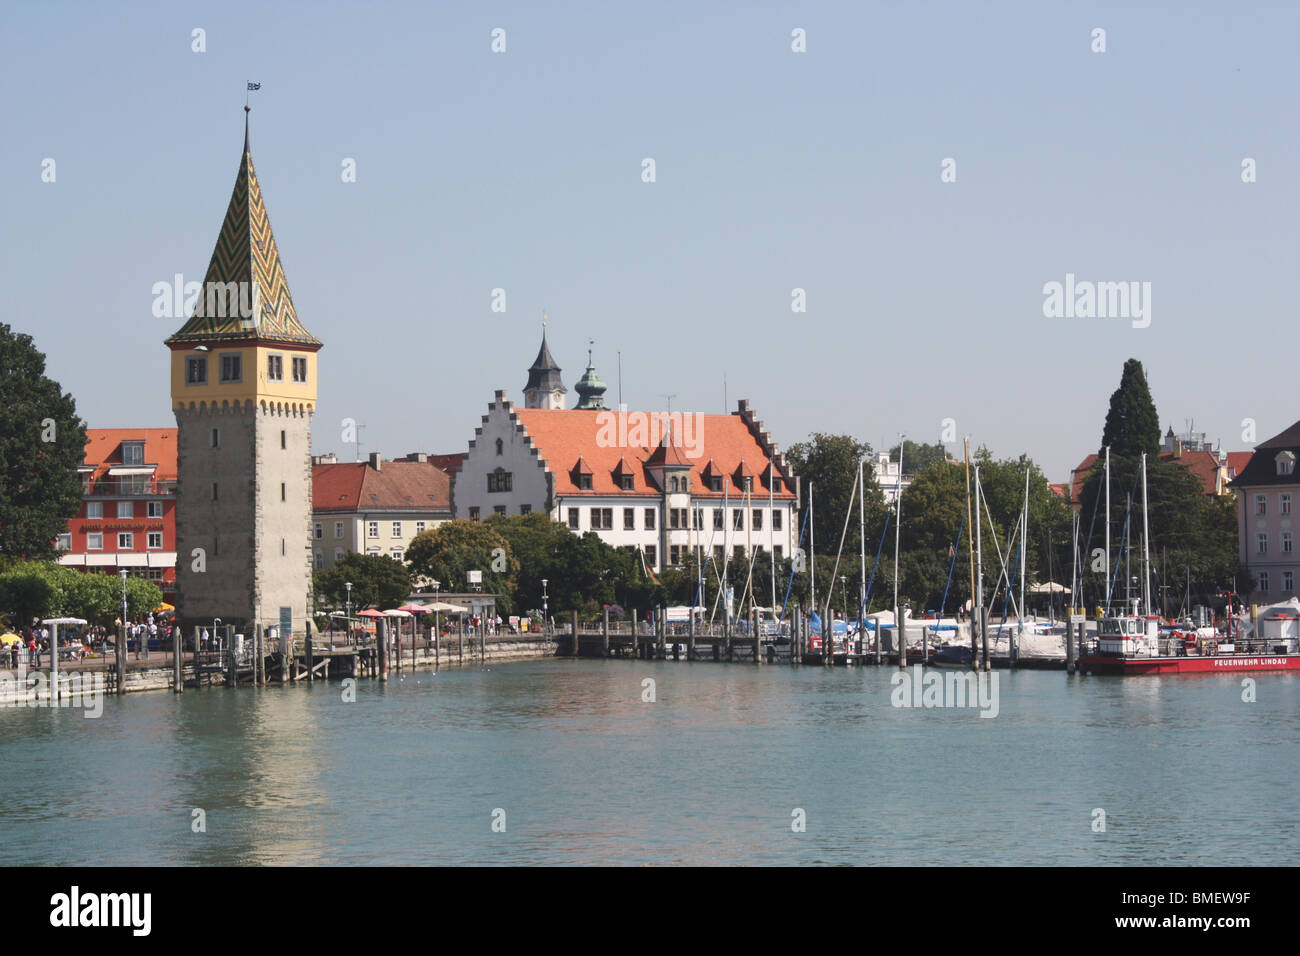 Lindau (Bodensee) Marina and The Mangturm (Mangenturm) tower on the edge of Lake Constance (Konstanz) in Germany on a sunny day Stock Photo